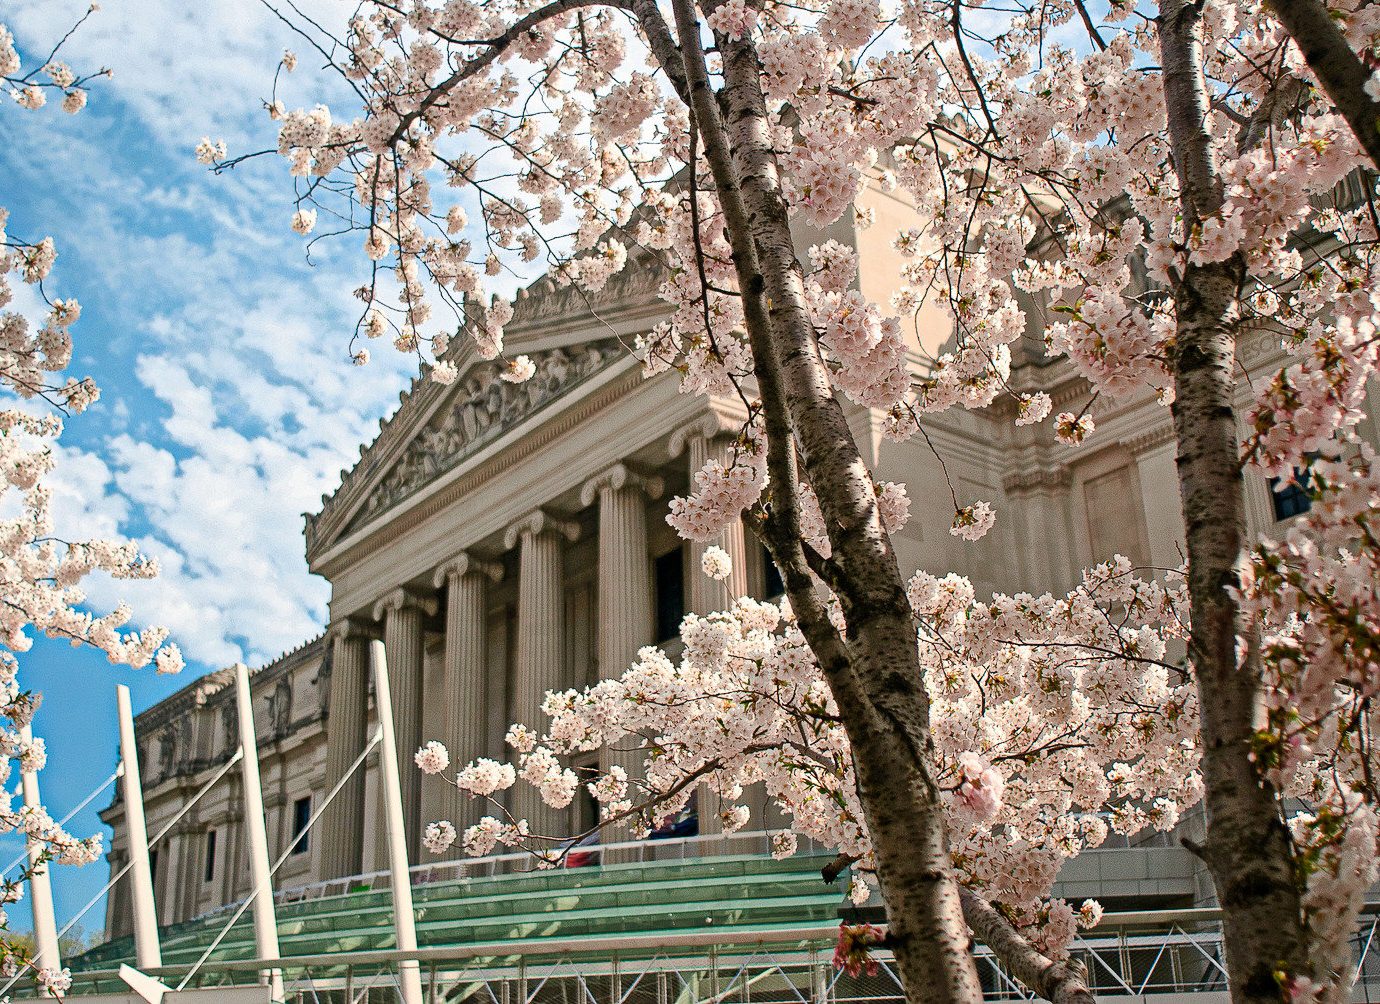 View of Brooklyn Museum with cherry blossom trees in bloom